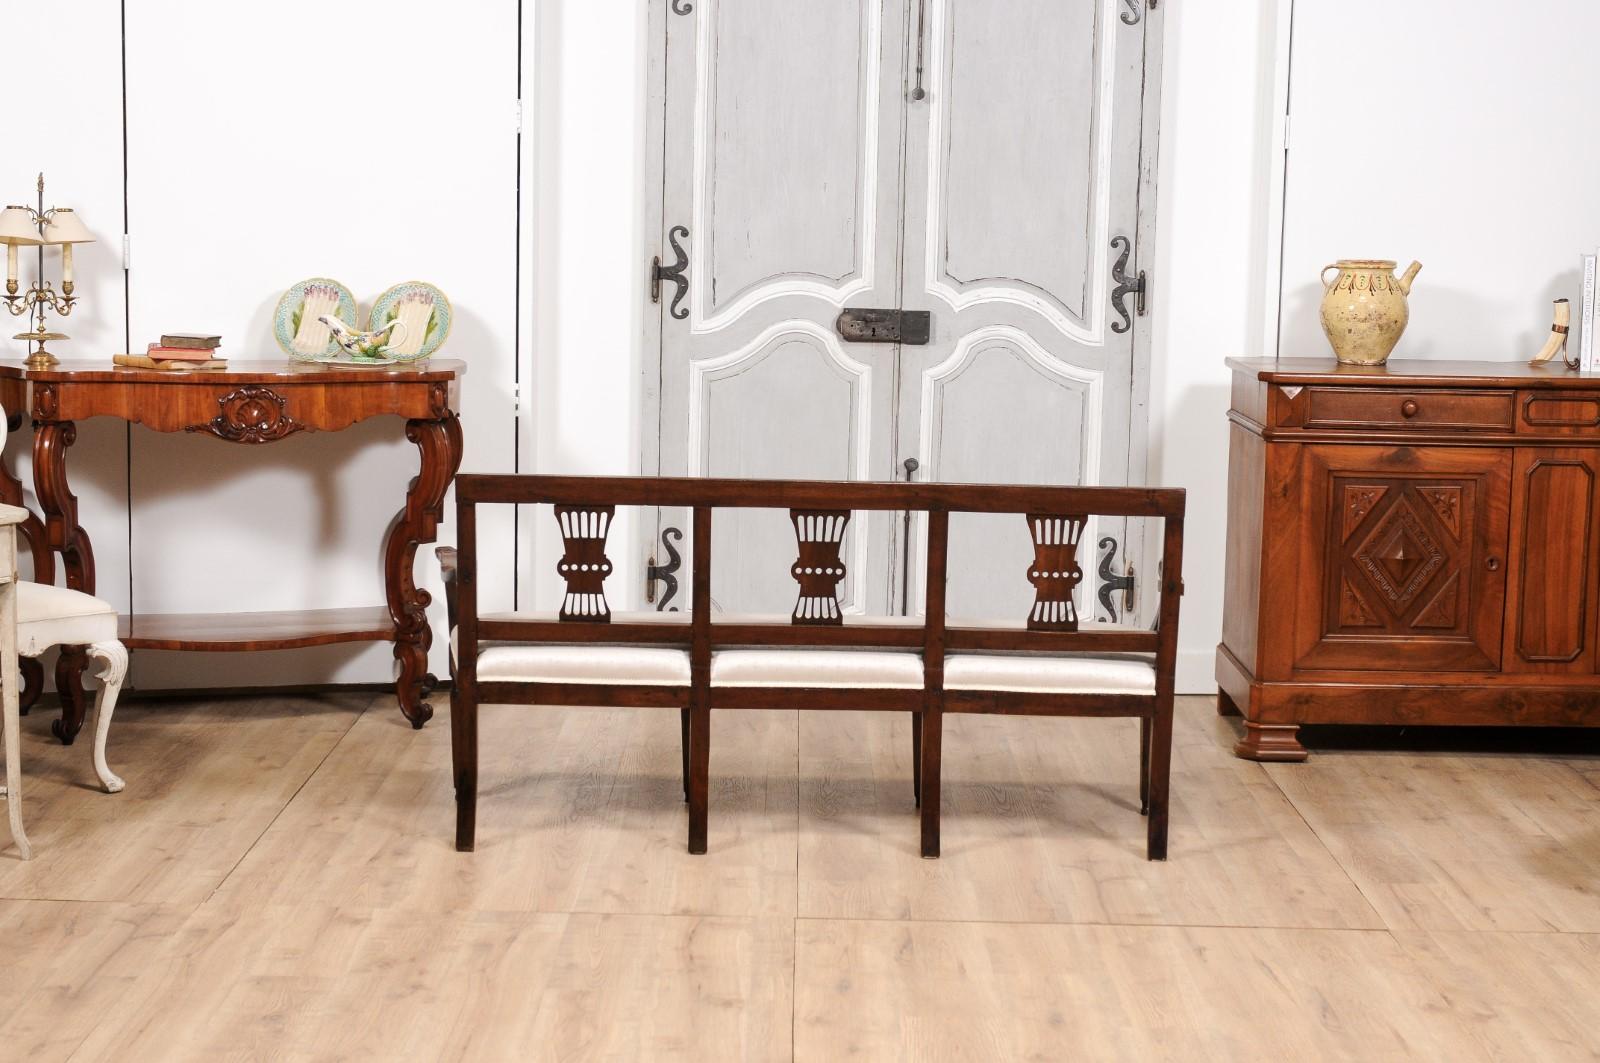 Italian 19th Century Walnut Three-Seater Bench with Carved Splats and Upholstery For Sale 4